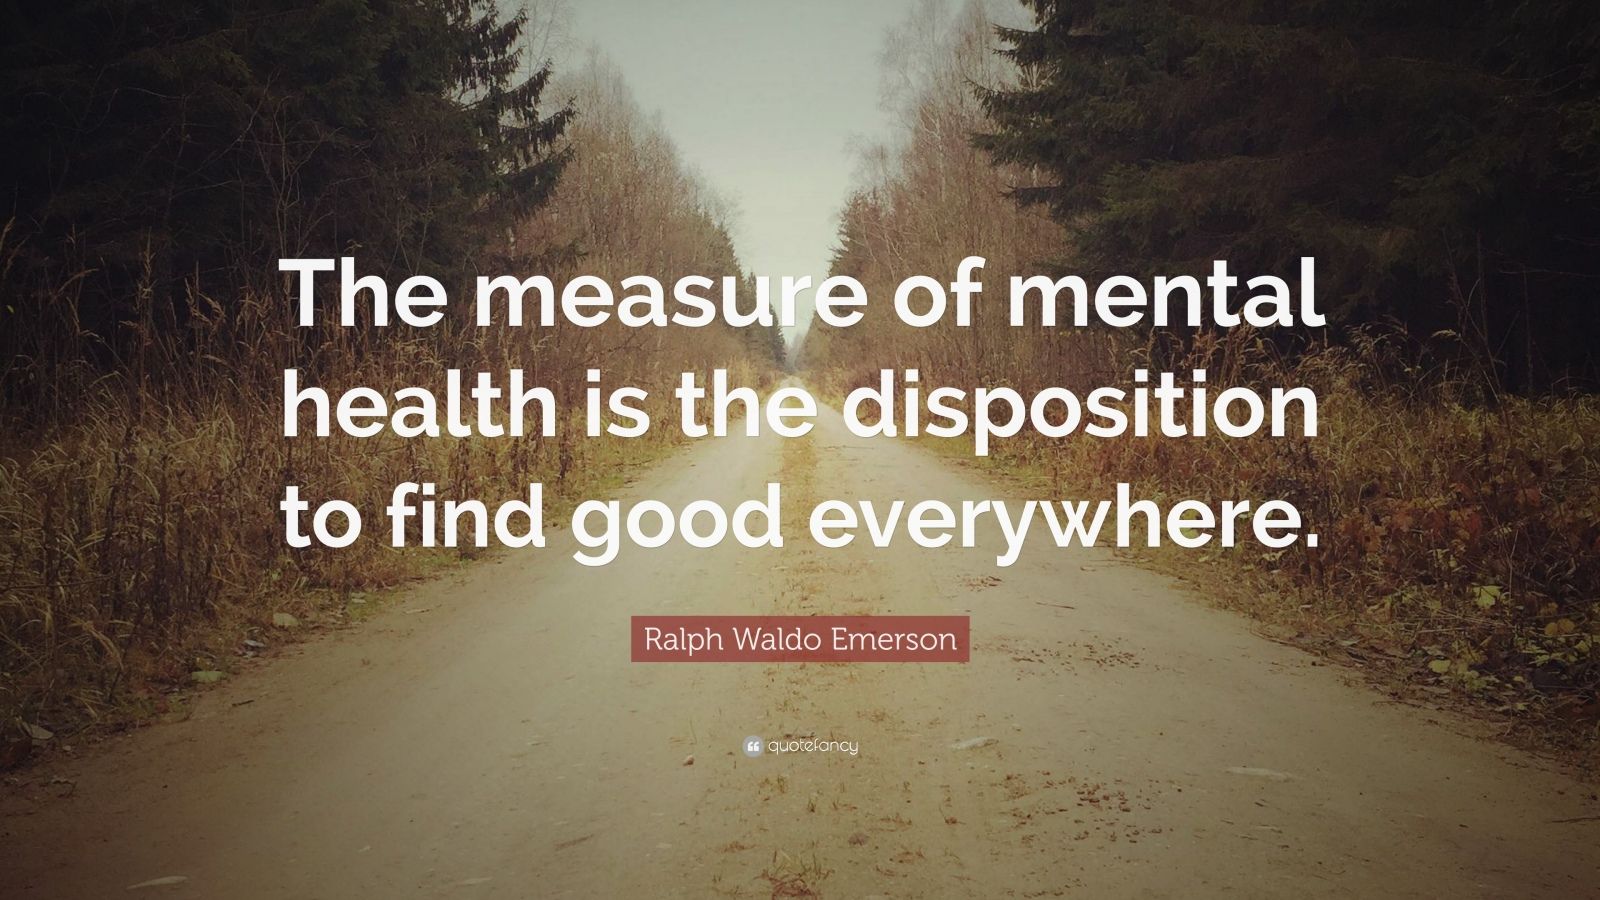 Ralph Waldo Emerson Quote: “The measure of mental health is the